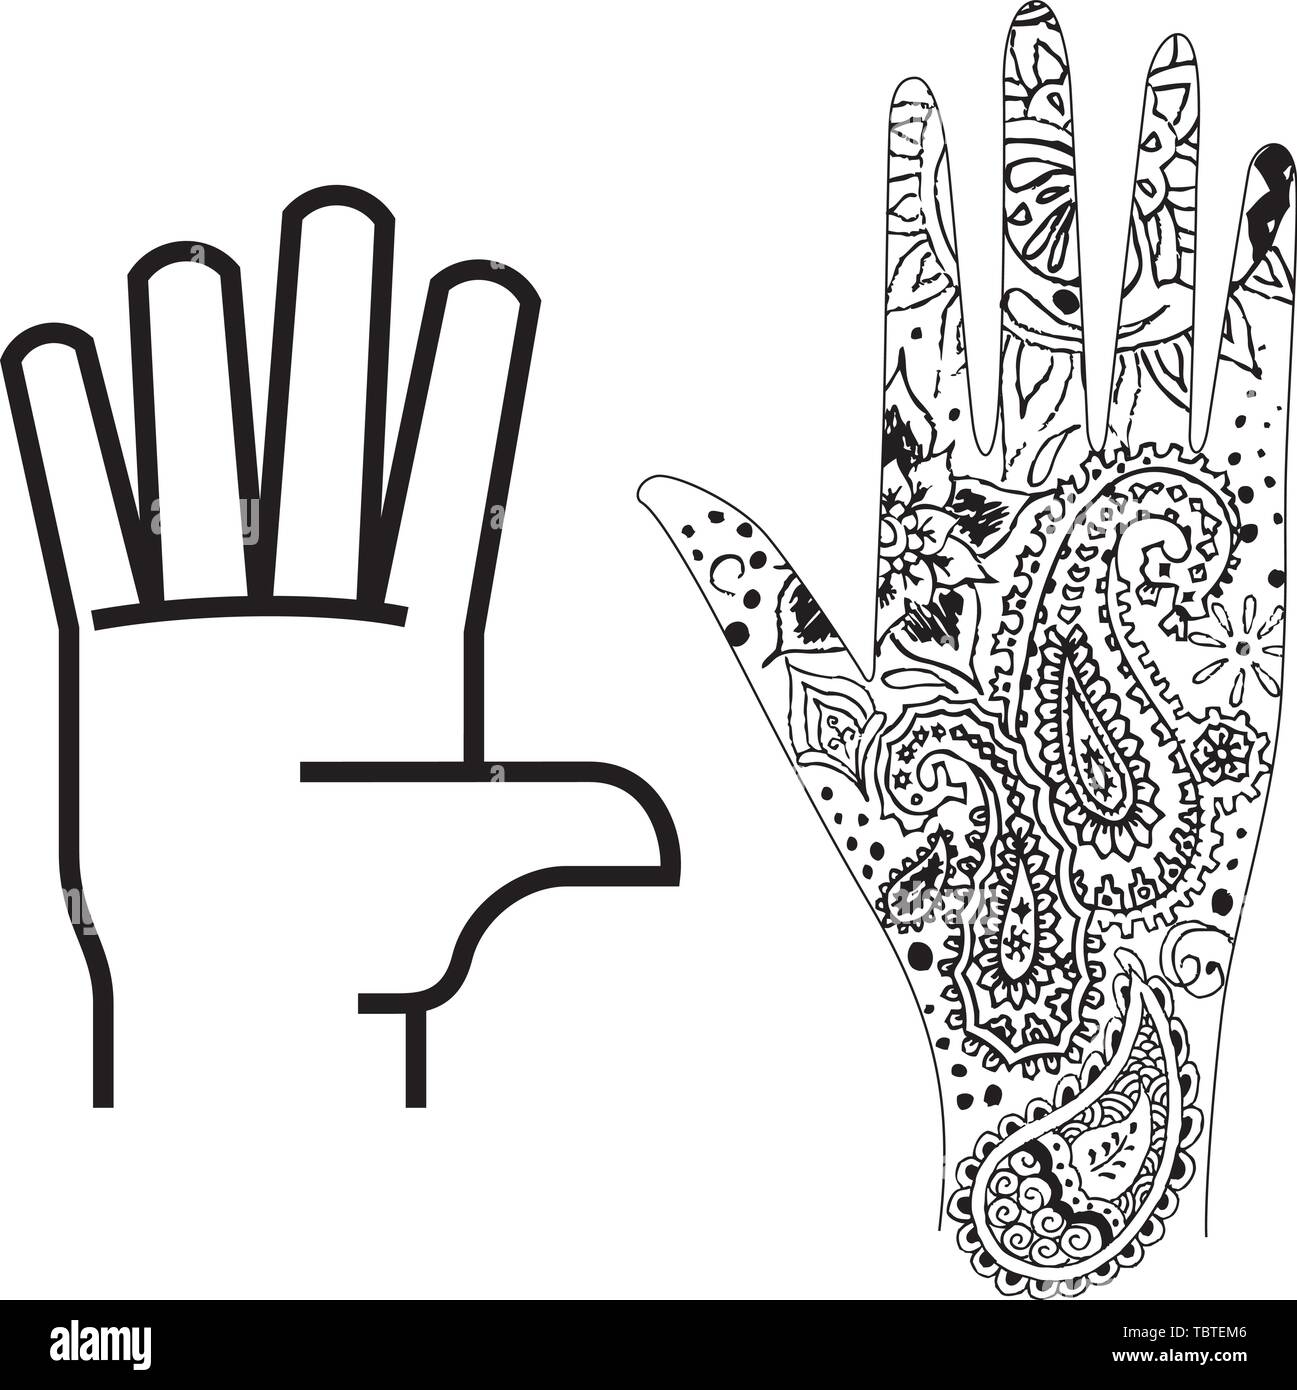 Vector illustration. Two hands icons in ethnic and geometric style. Stock Vector